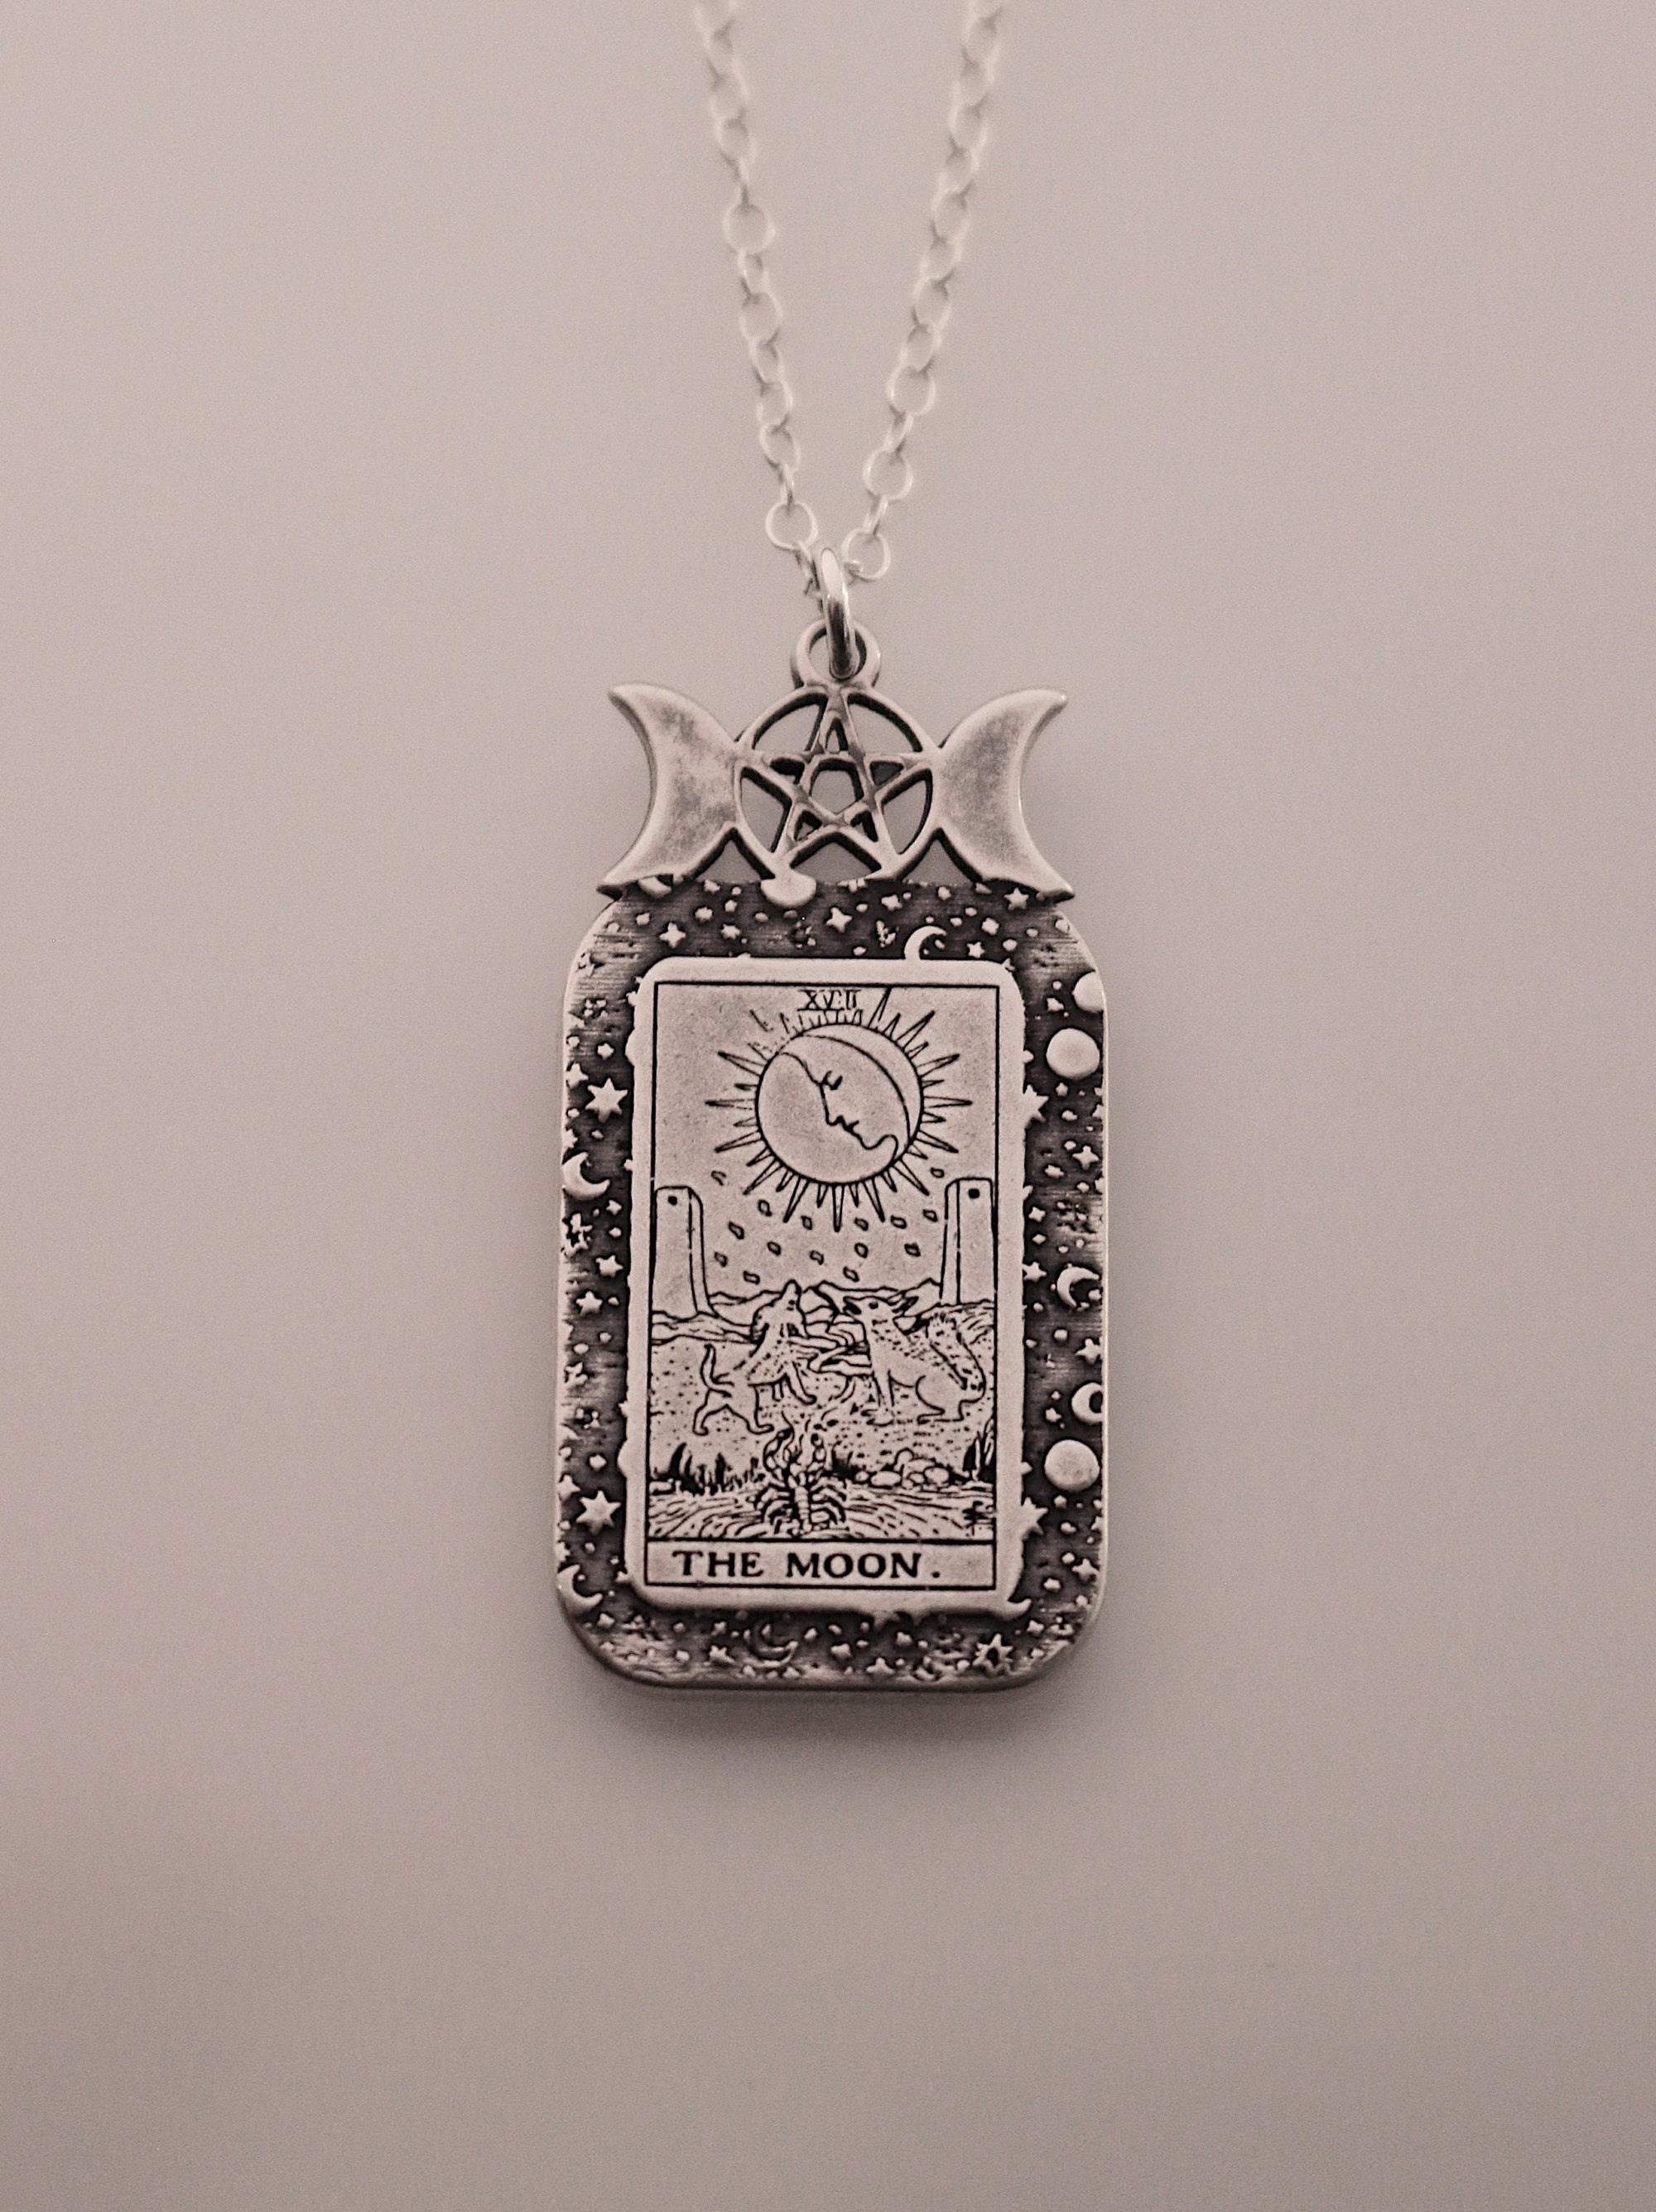 The Moon Tarot Card Necklace | Best Friend Birthday Gift | Tarot Card Necklace | Celestial Triple Moon Goddess Jewelry | Witch Necklace